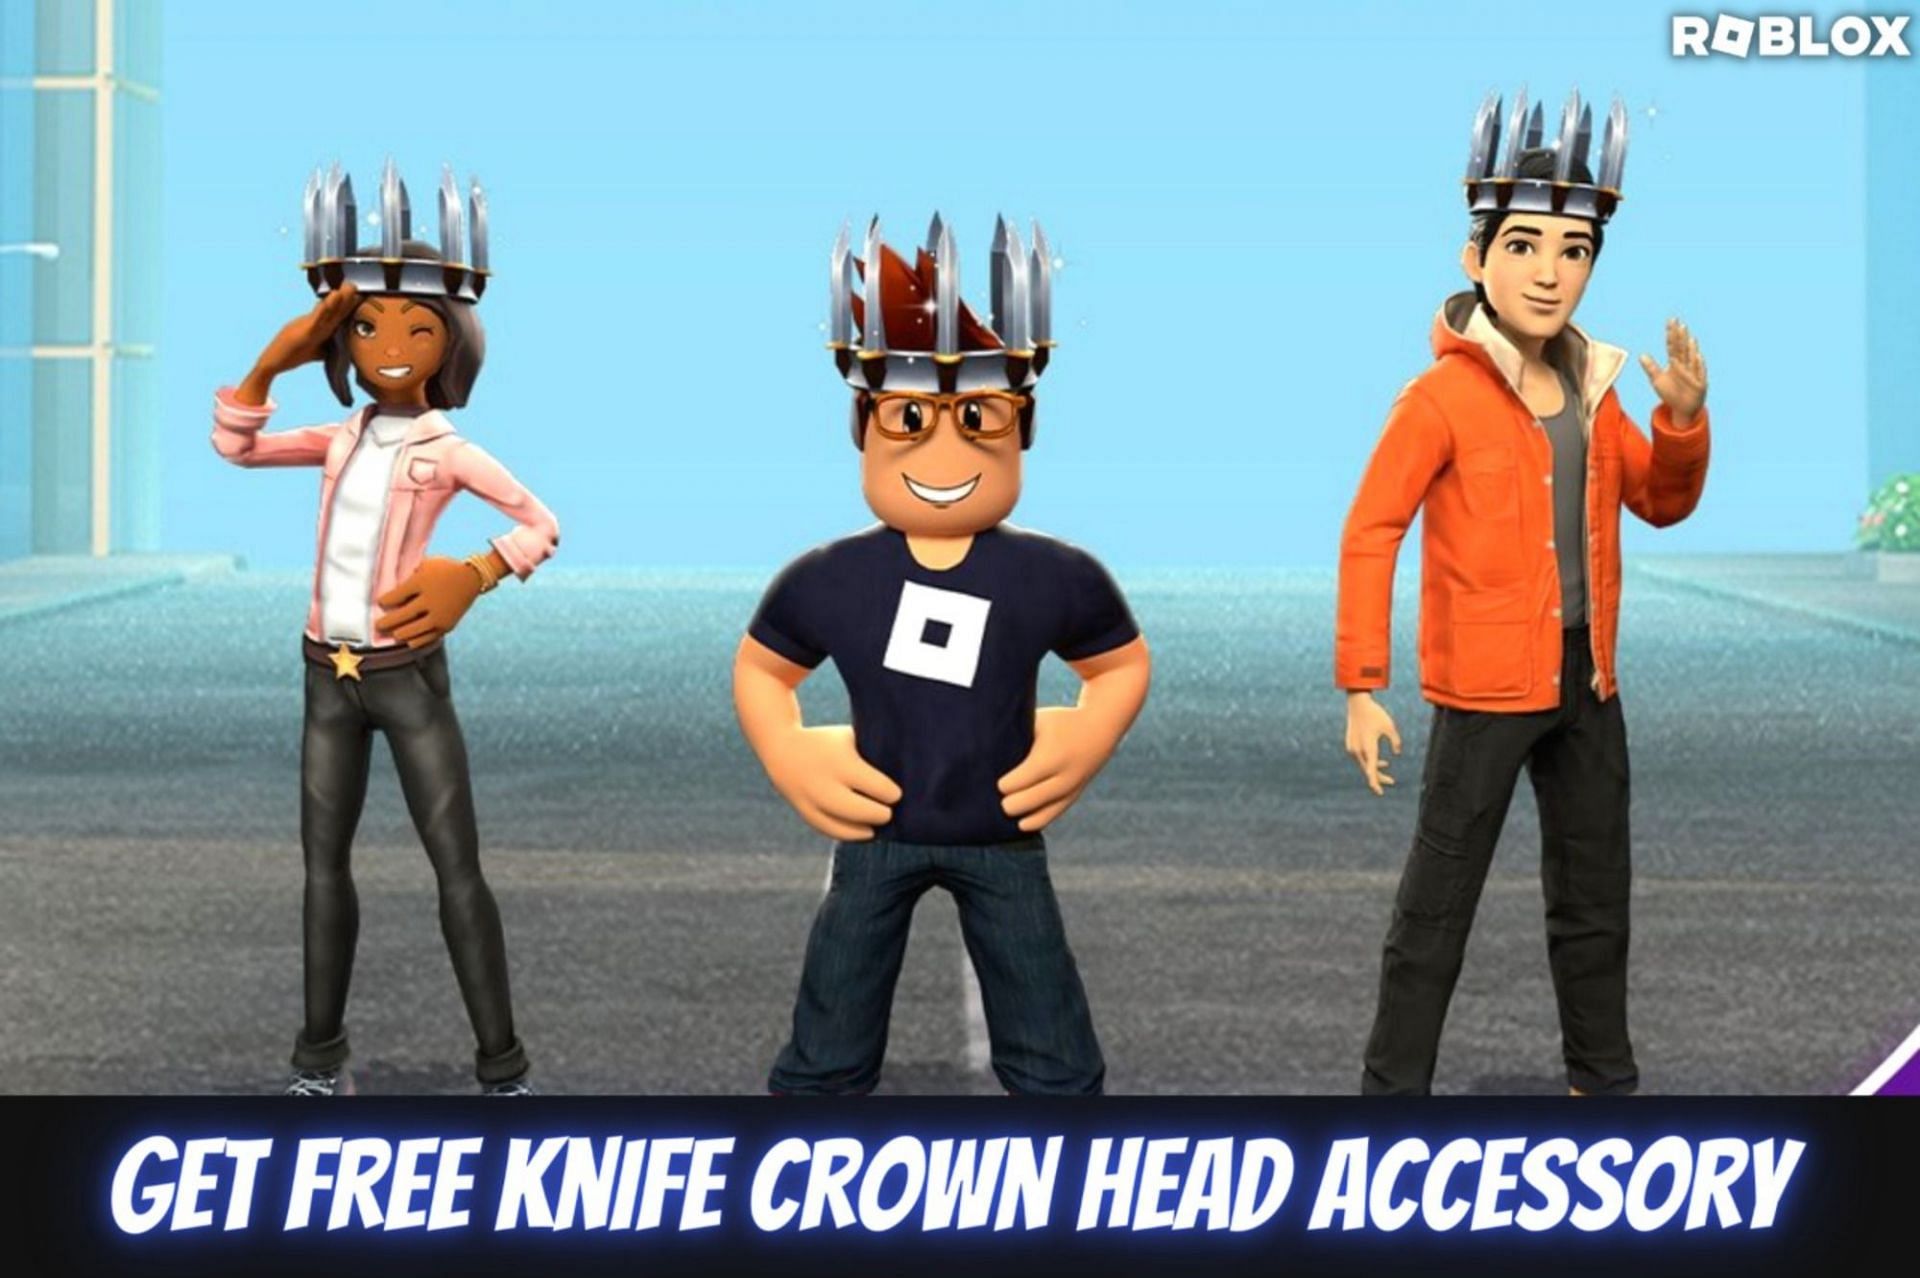 Collect Knife Crown for free (Image via Sportskeeda)